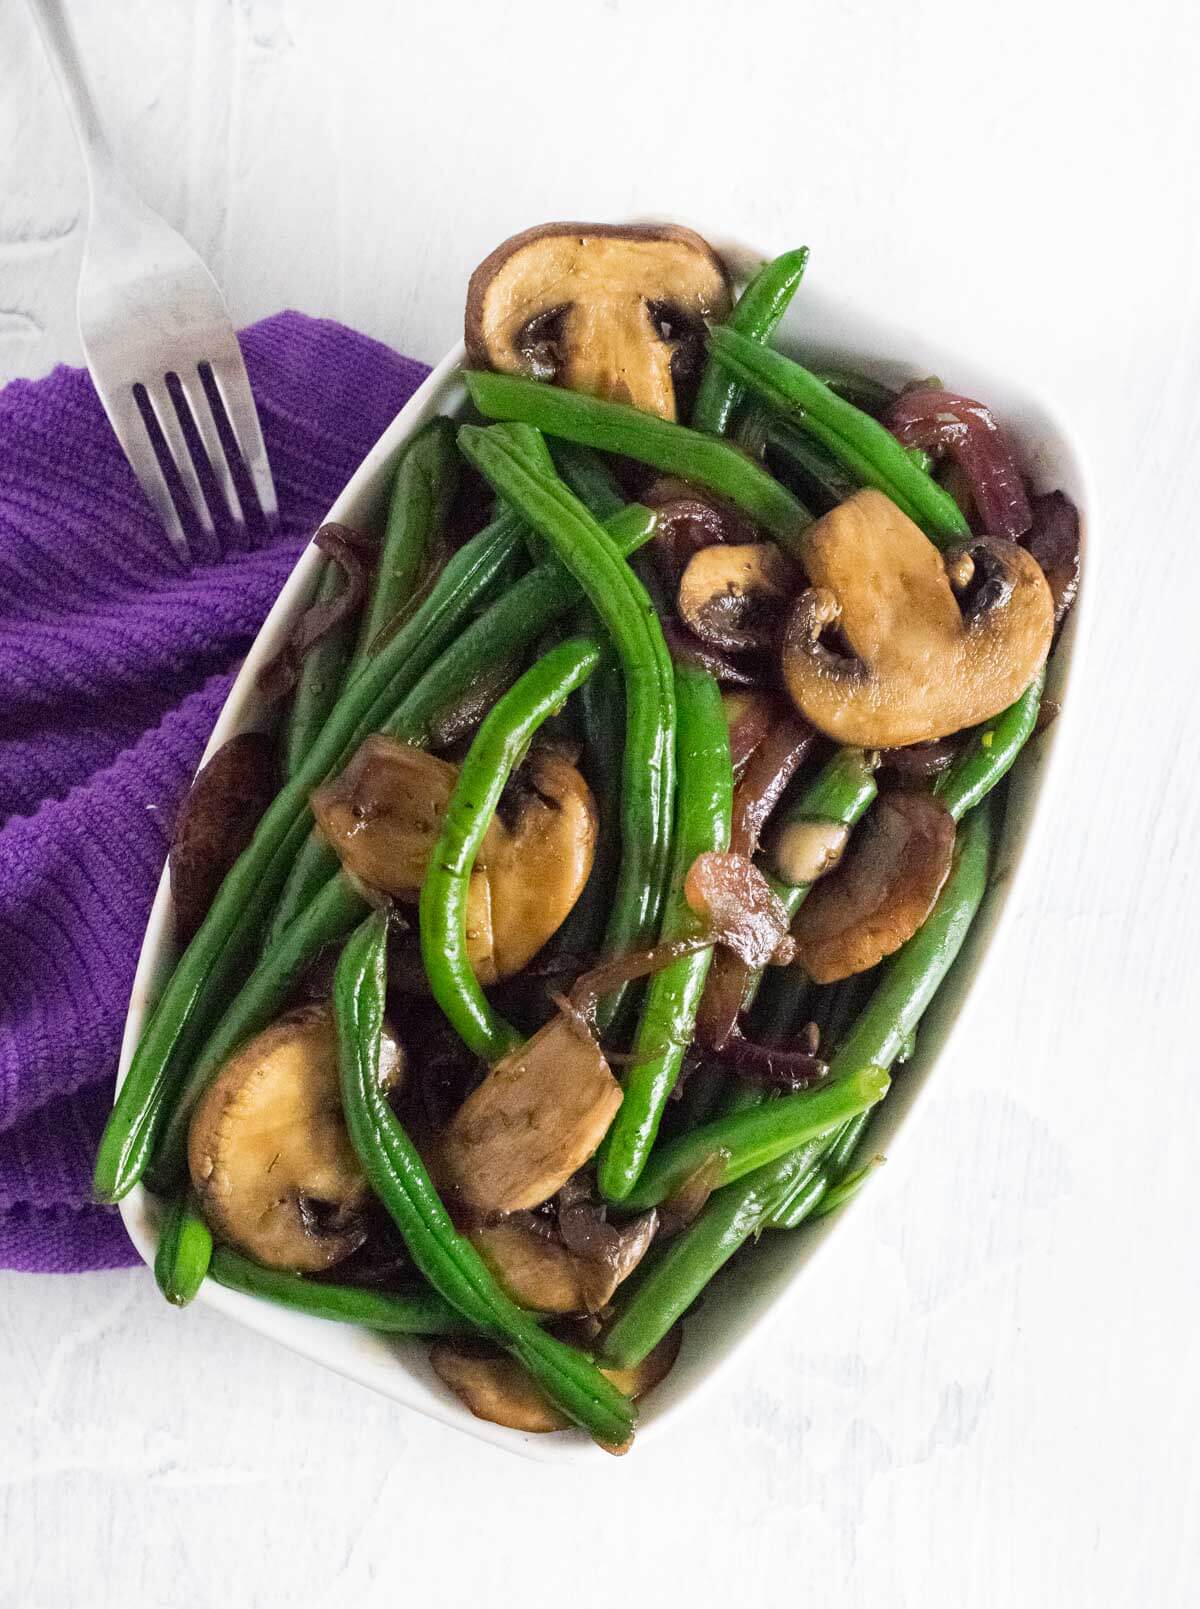 Green beans and mushrooms.